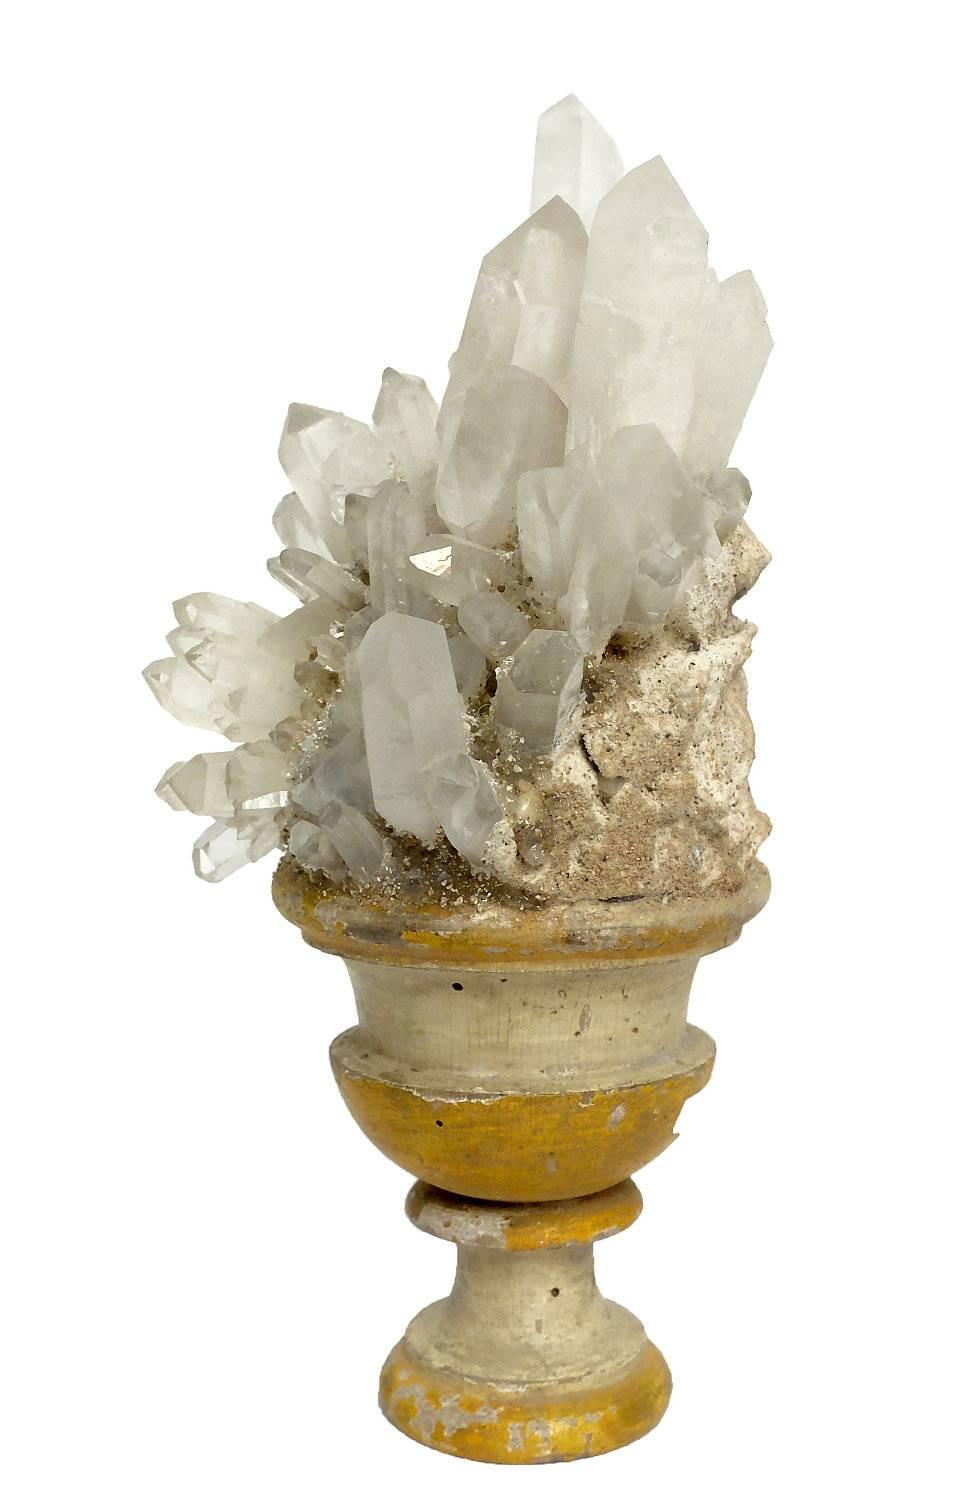 A naturalia mineral specimen a rock crystals druze, mounted over a white and yellow lacquered wooden base in a shape of a vase.